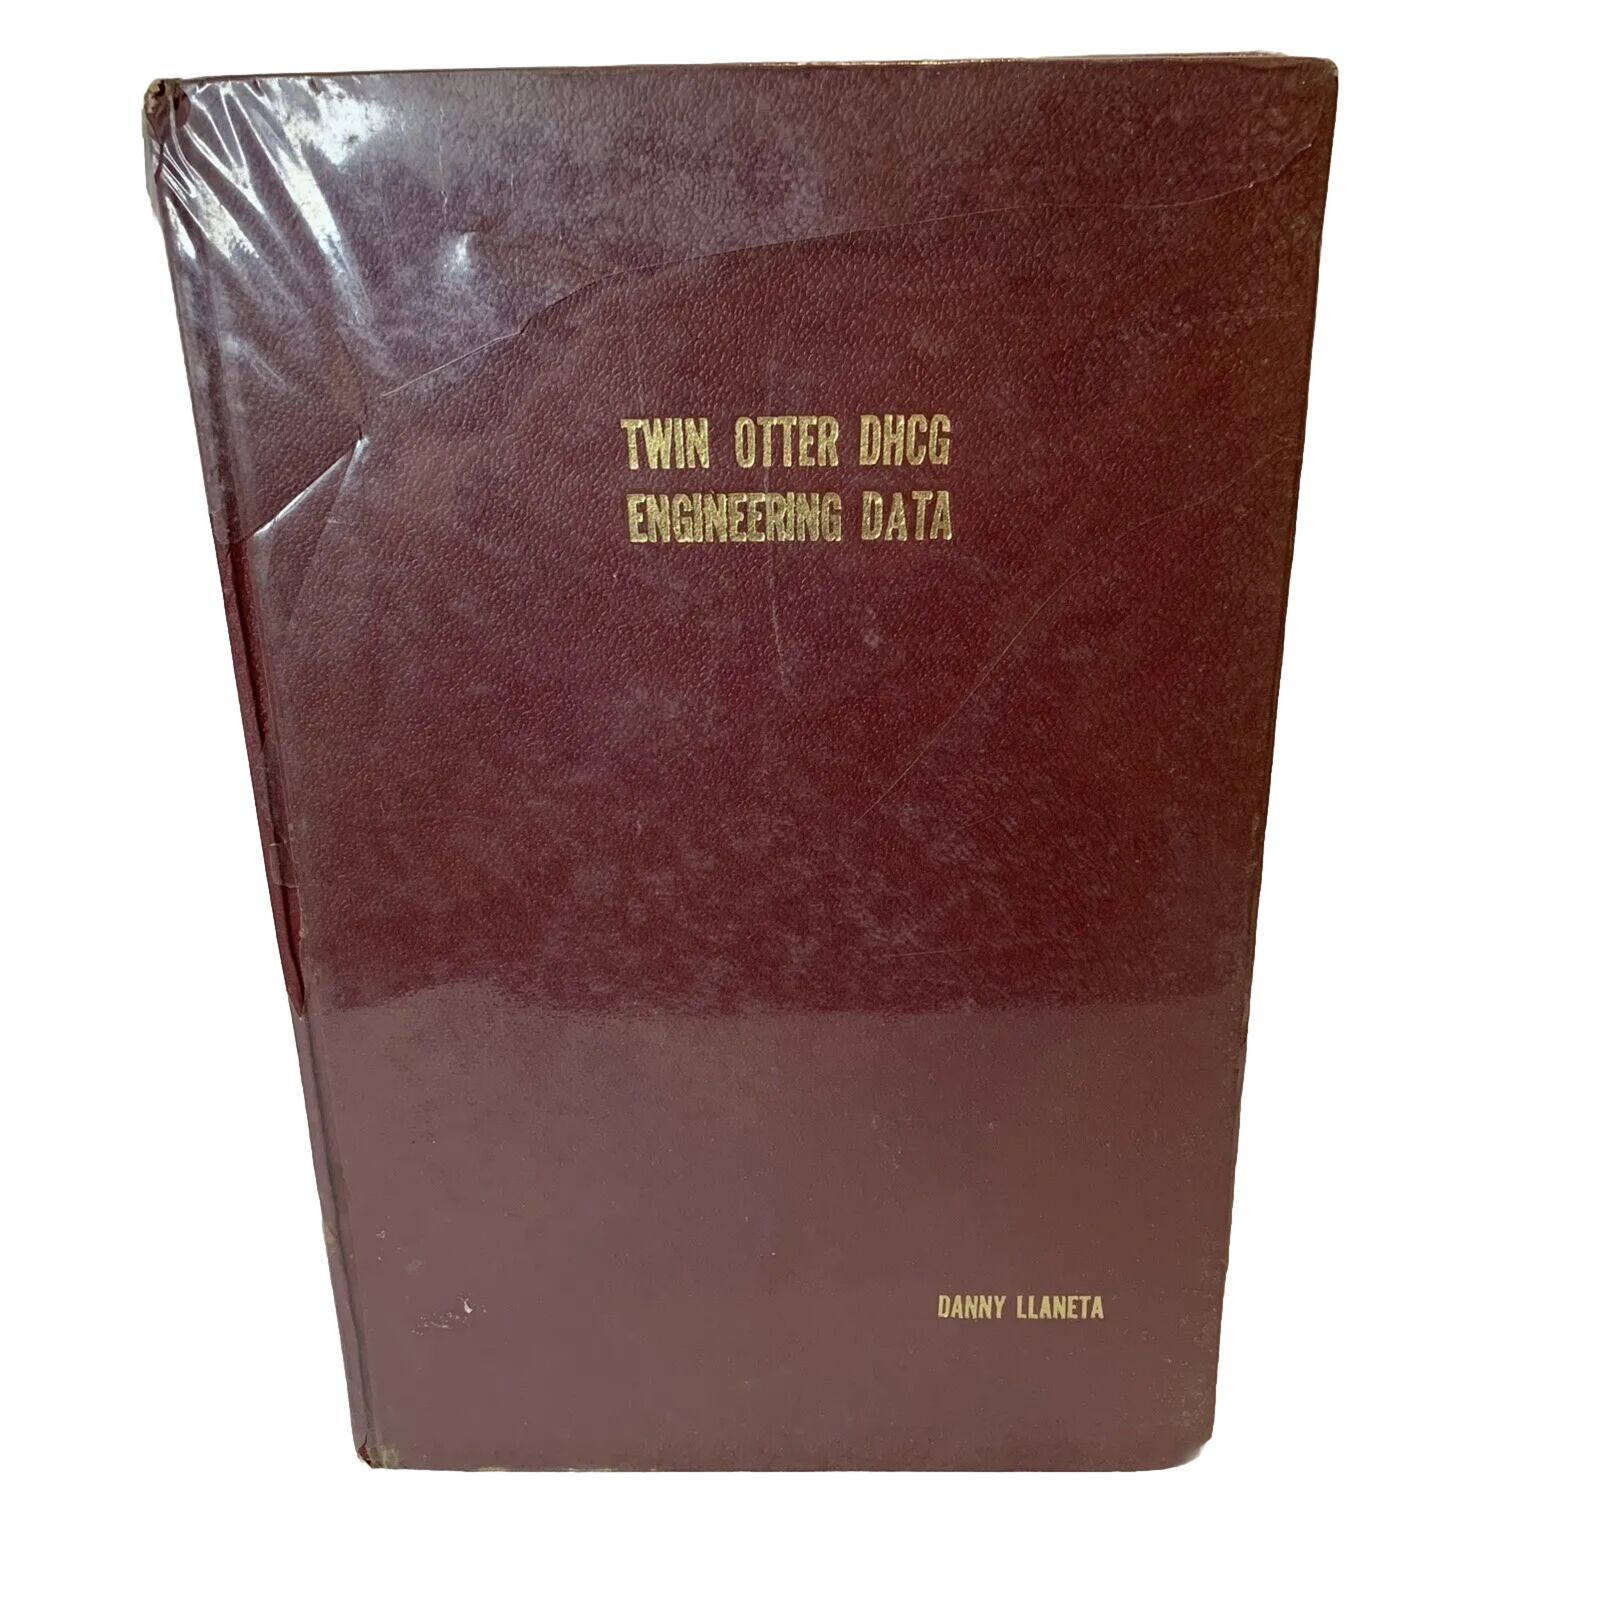 VTG Twin Otter DHCG Engineering Data Manual Hardcover Book DHC-6 Float Airplane